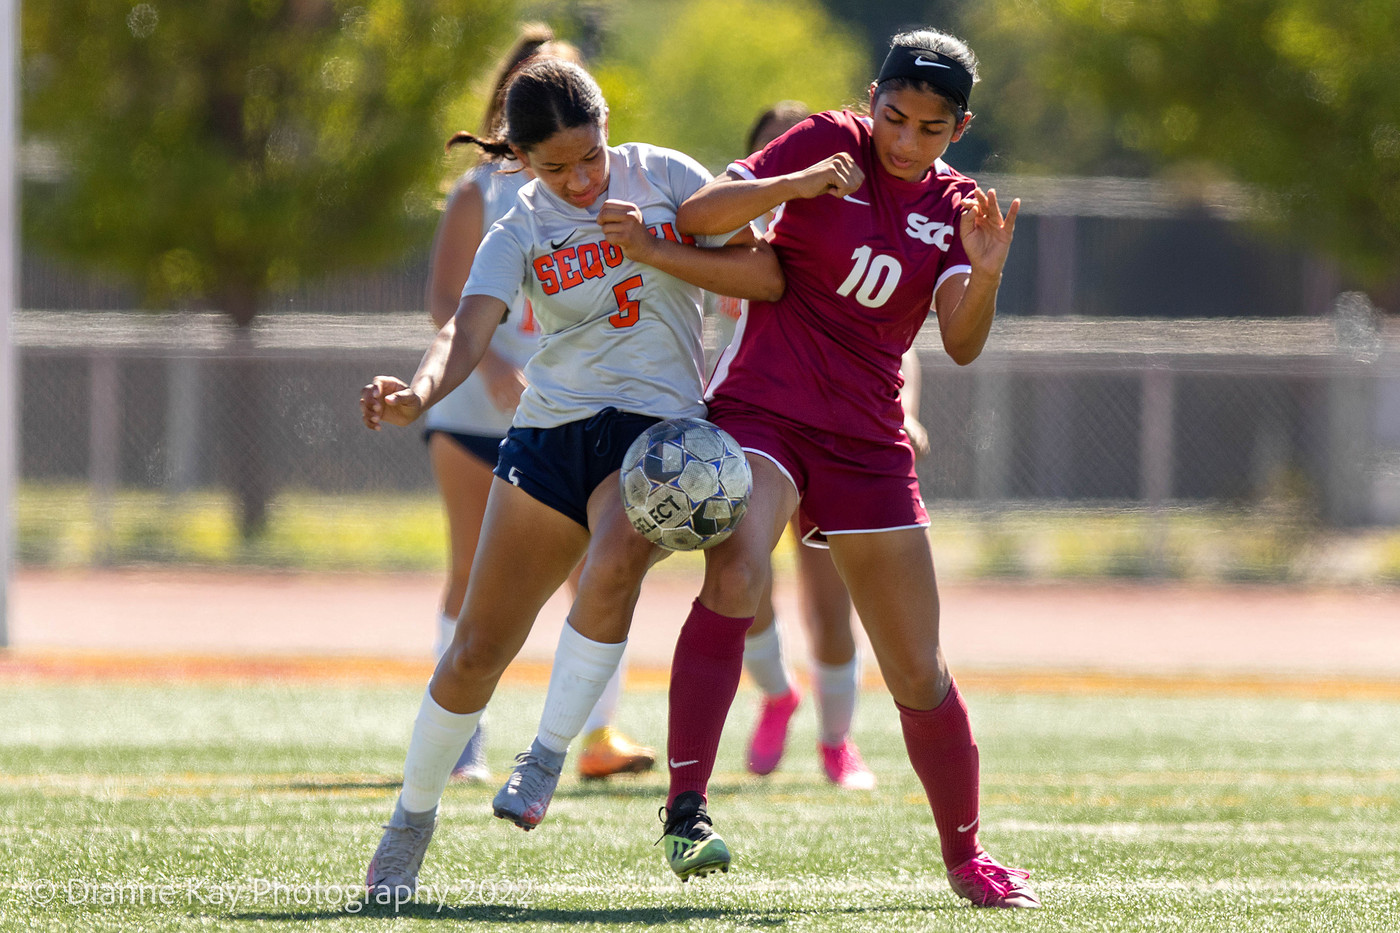 Sequoias hands City their first shutout loss of the season (4-0) on Friday afternoon